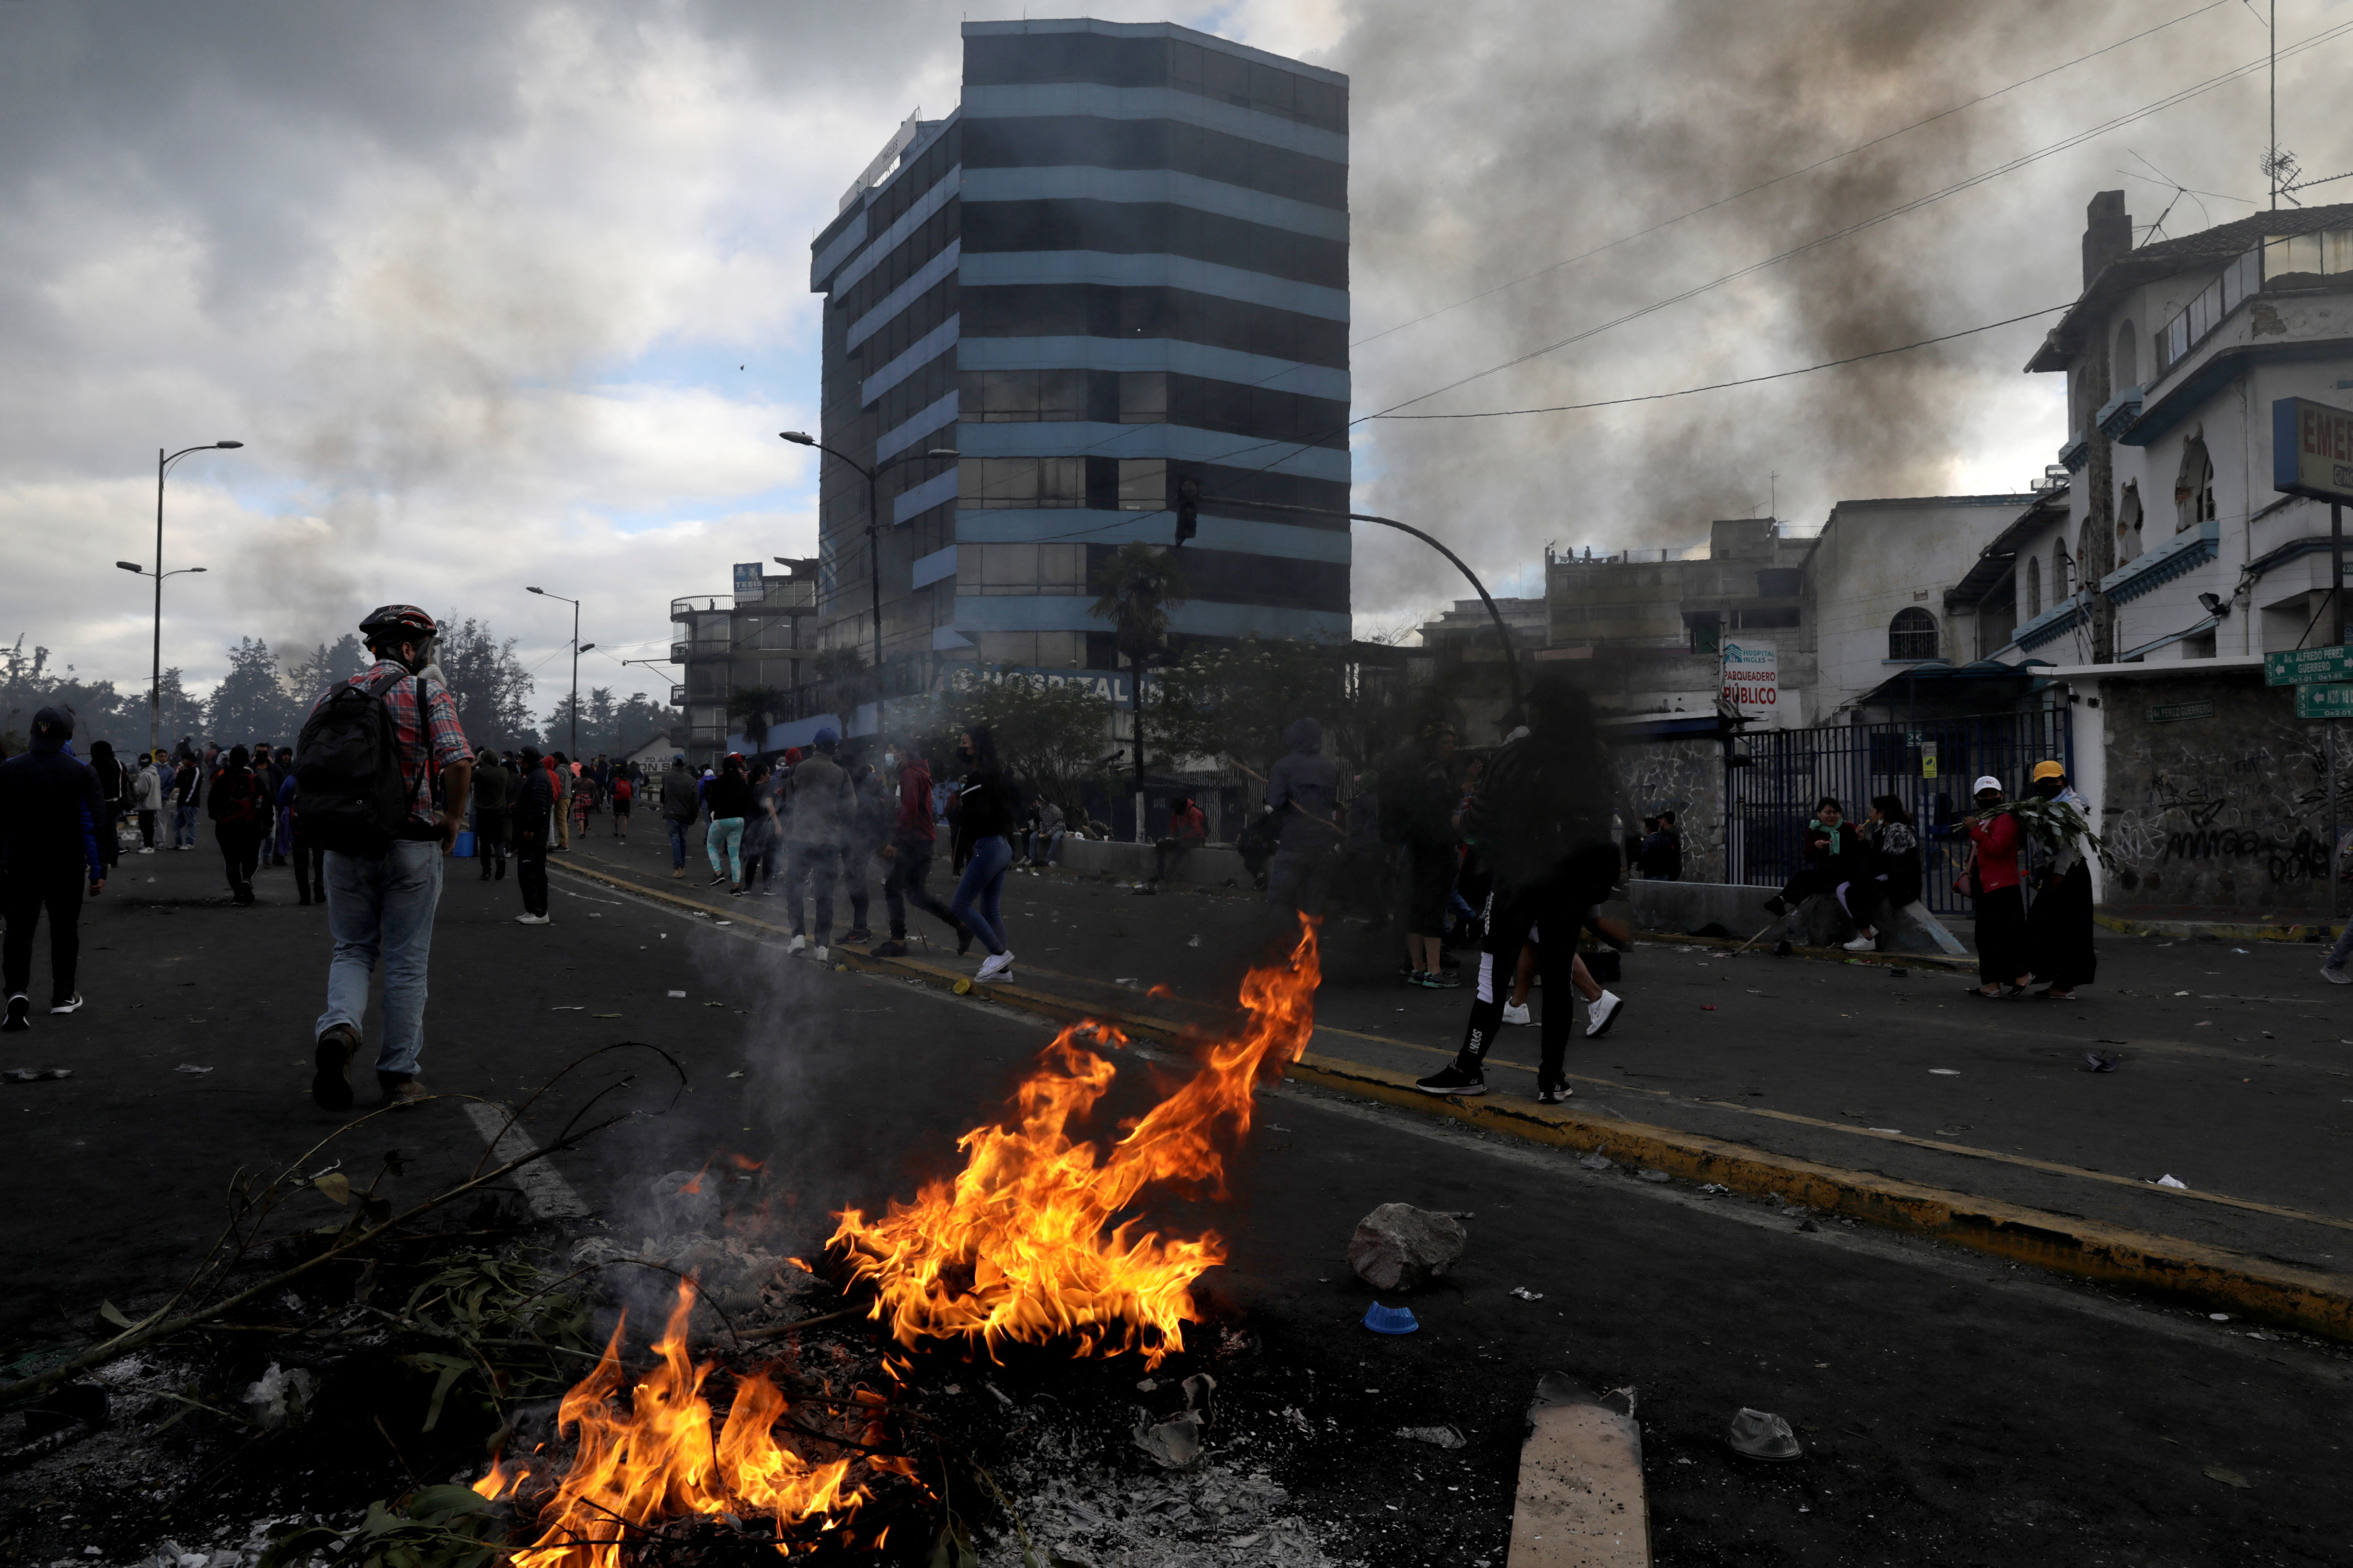 Indigenous protesters march through Quito demanding concessions from President Lasso